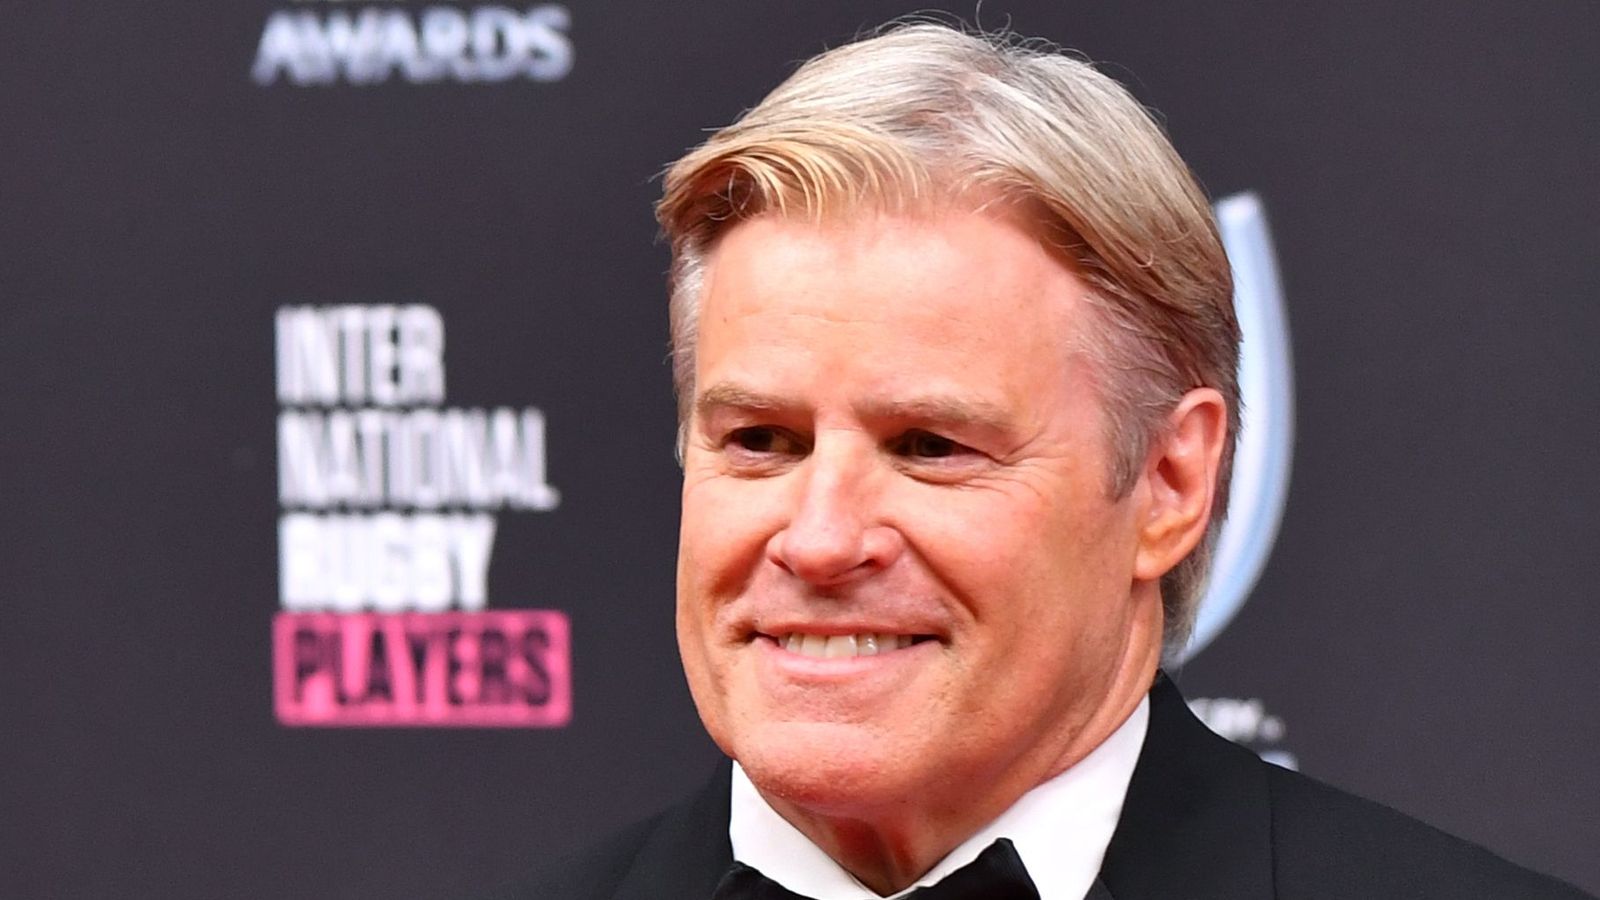 Brett Gosper leaves World Rugby CEO role for NFL position | Rugby Union ...